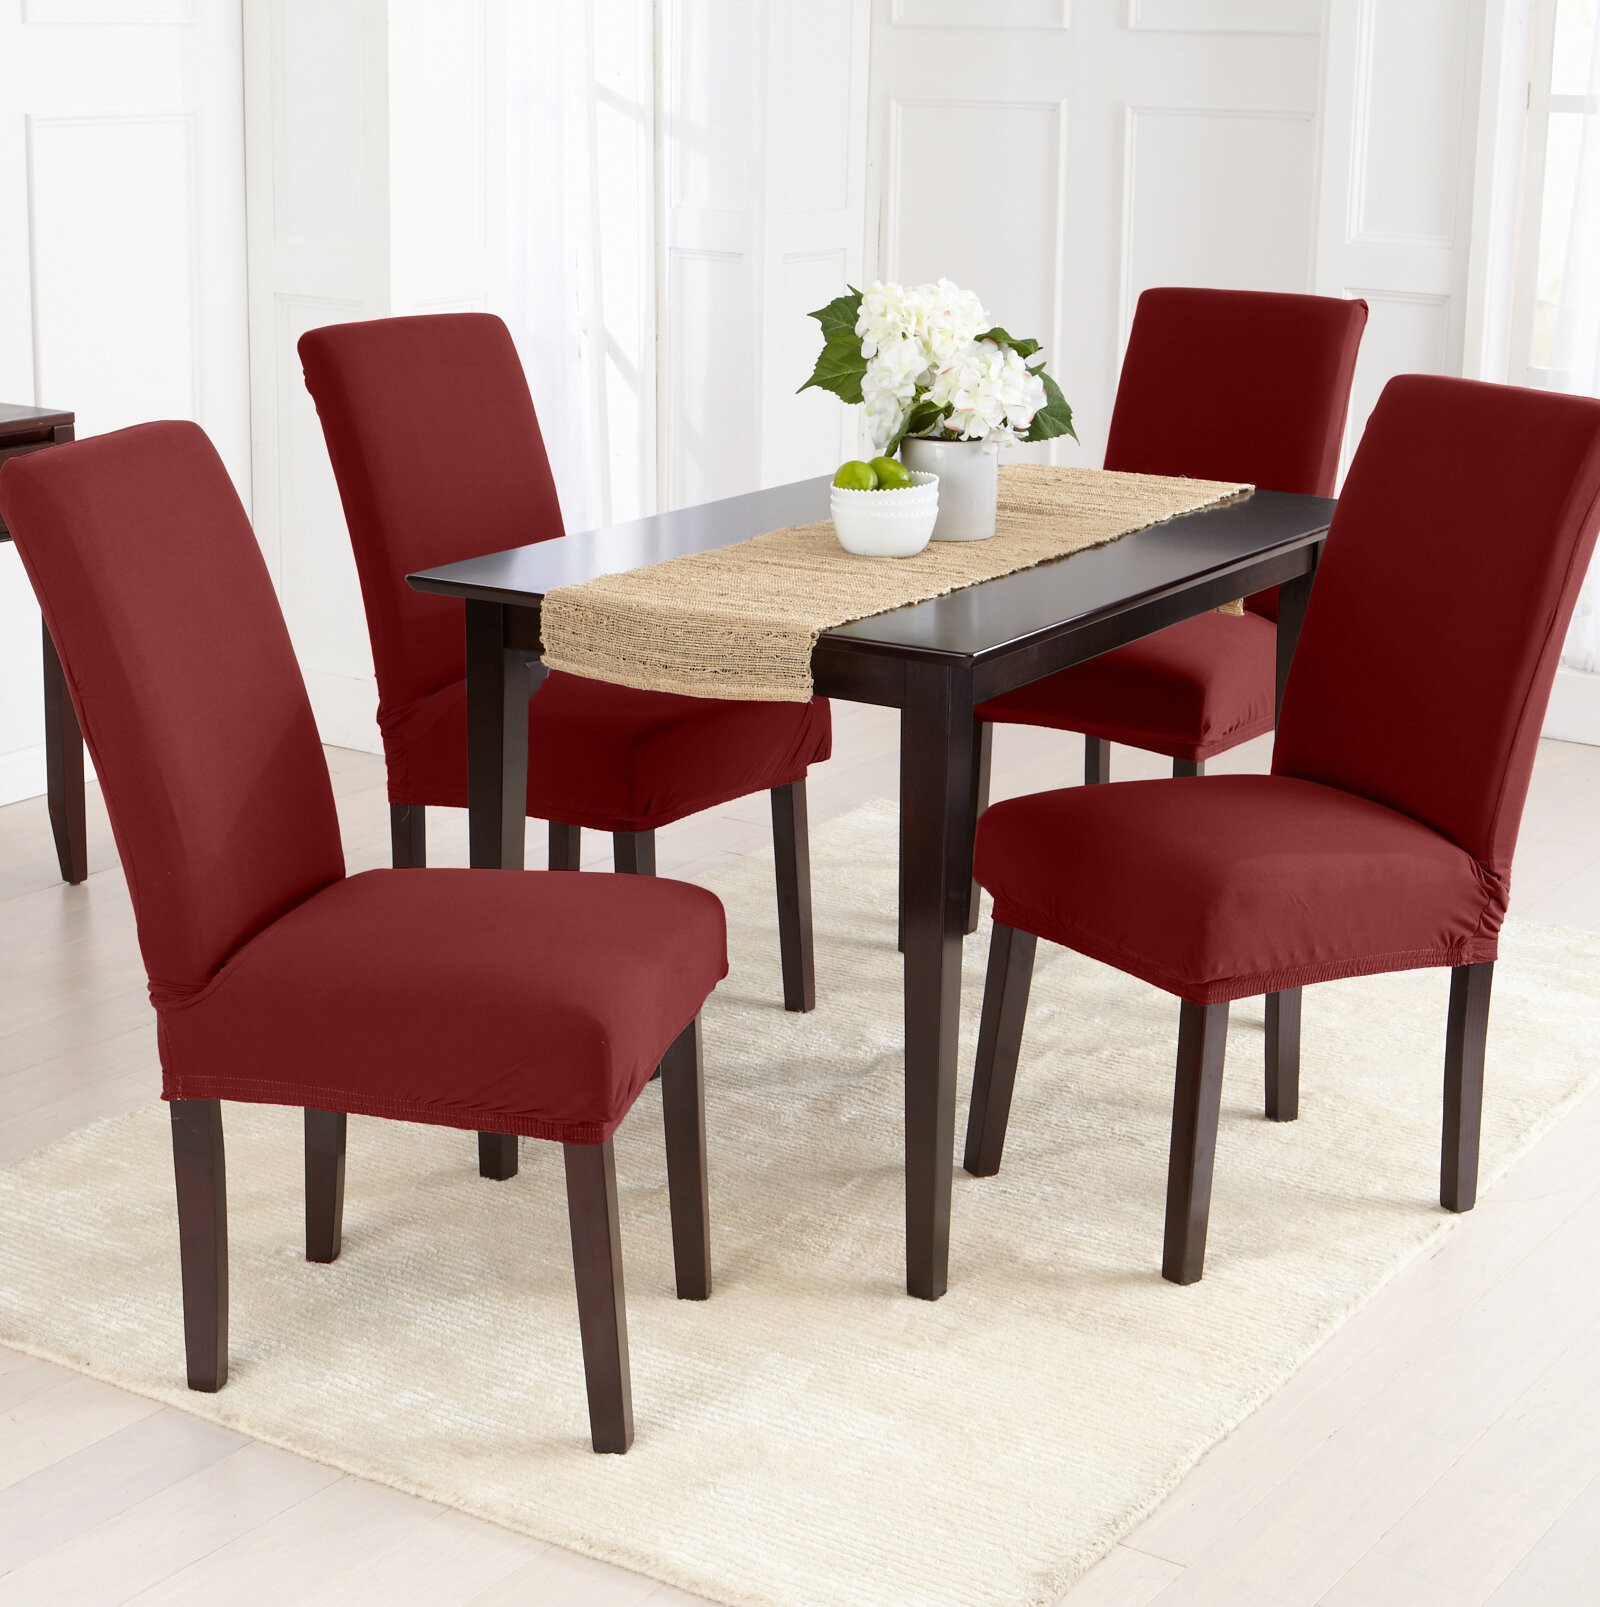 Jersey Knit Solid Dining Chair Slipcover (Set of 4)